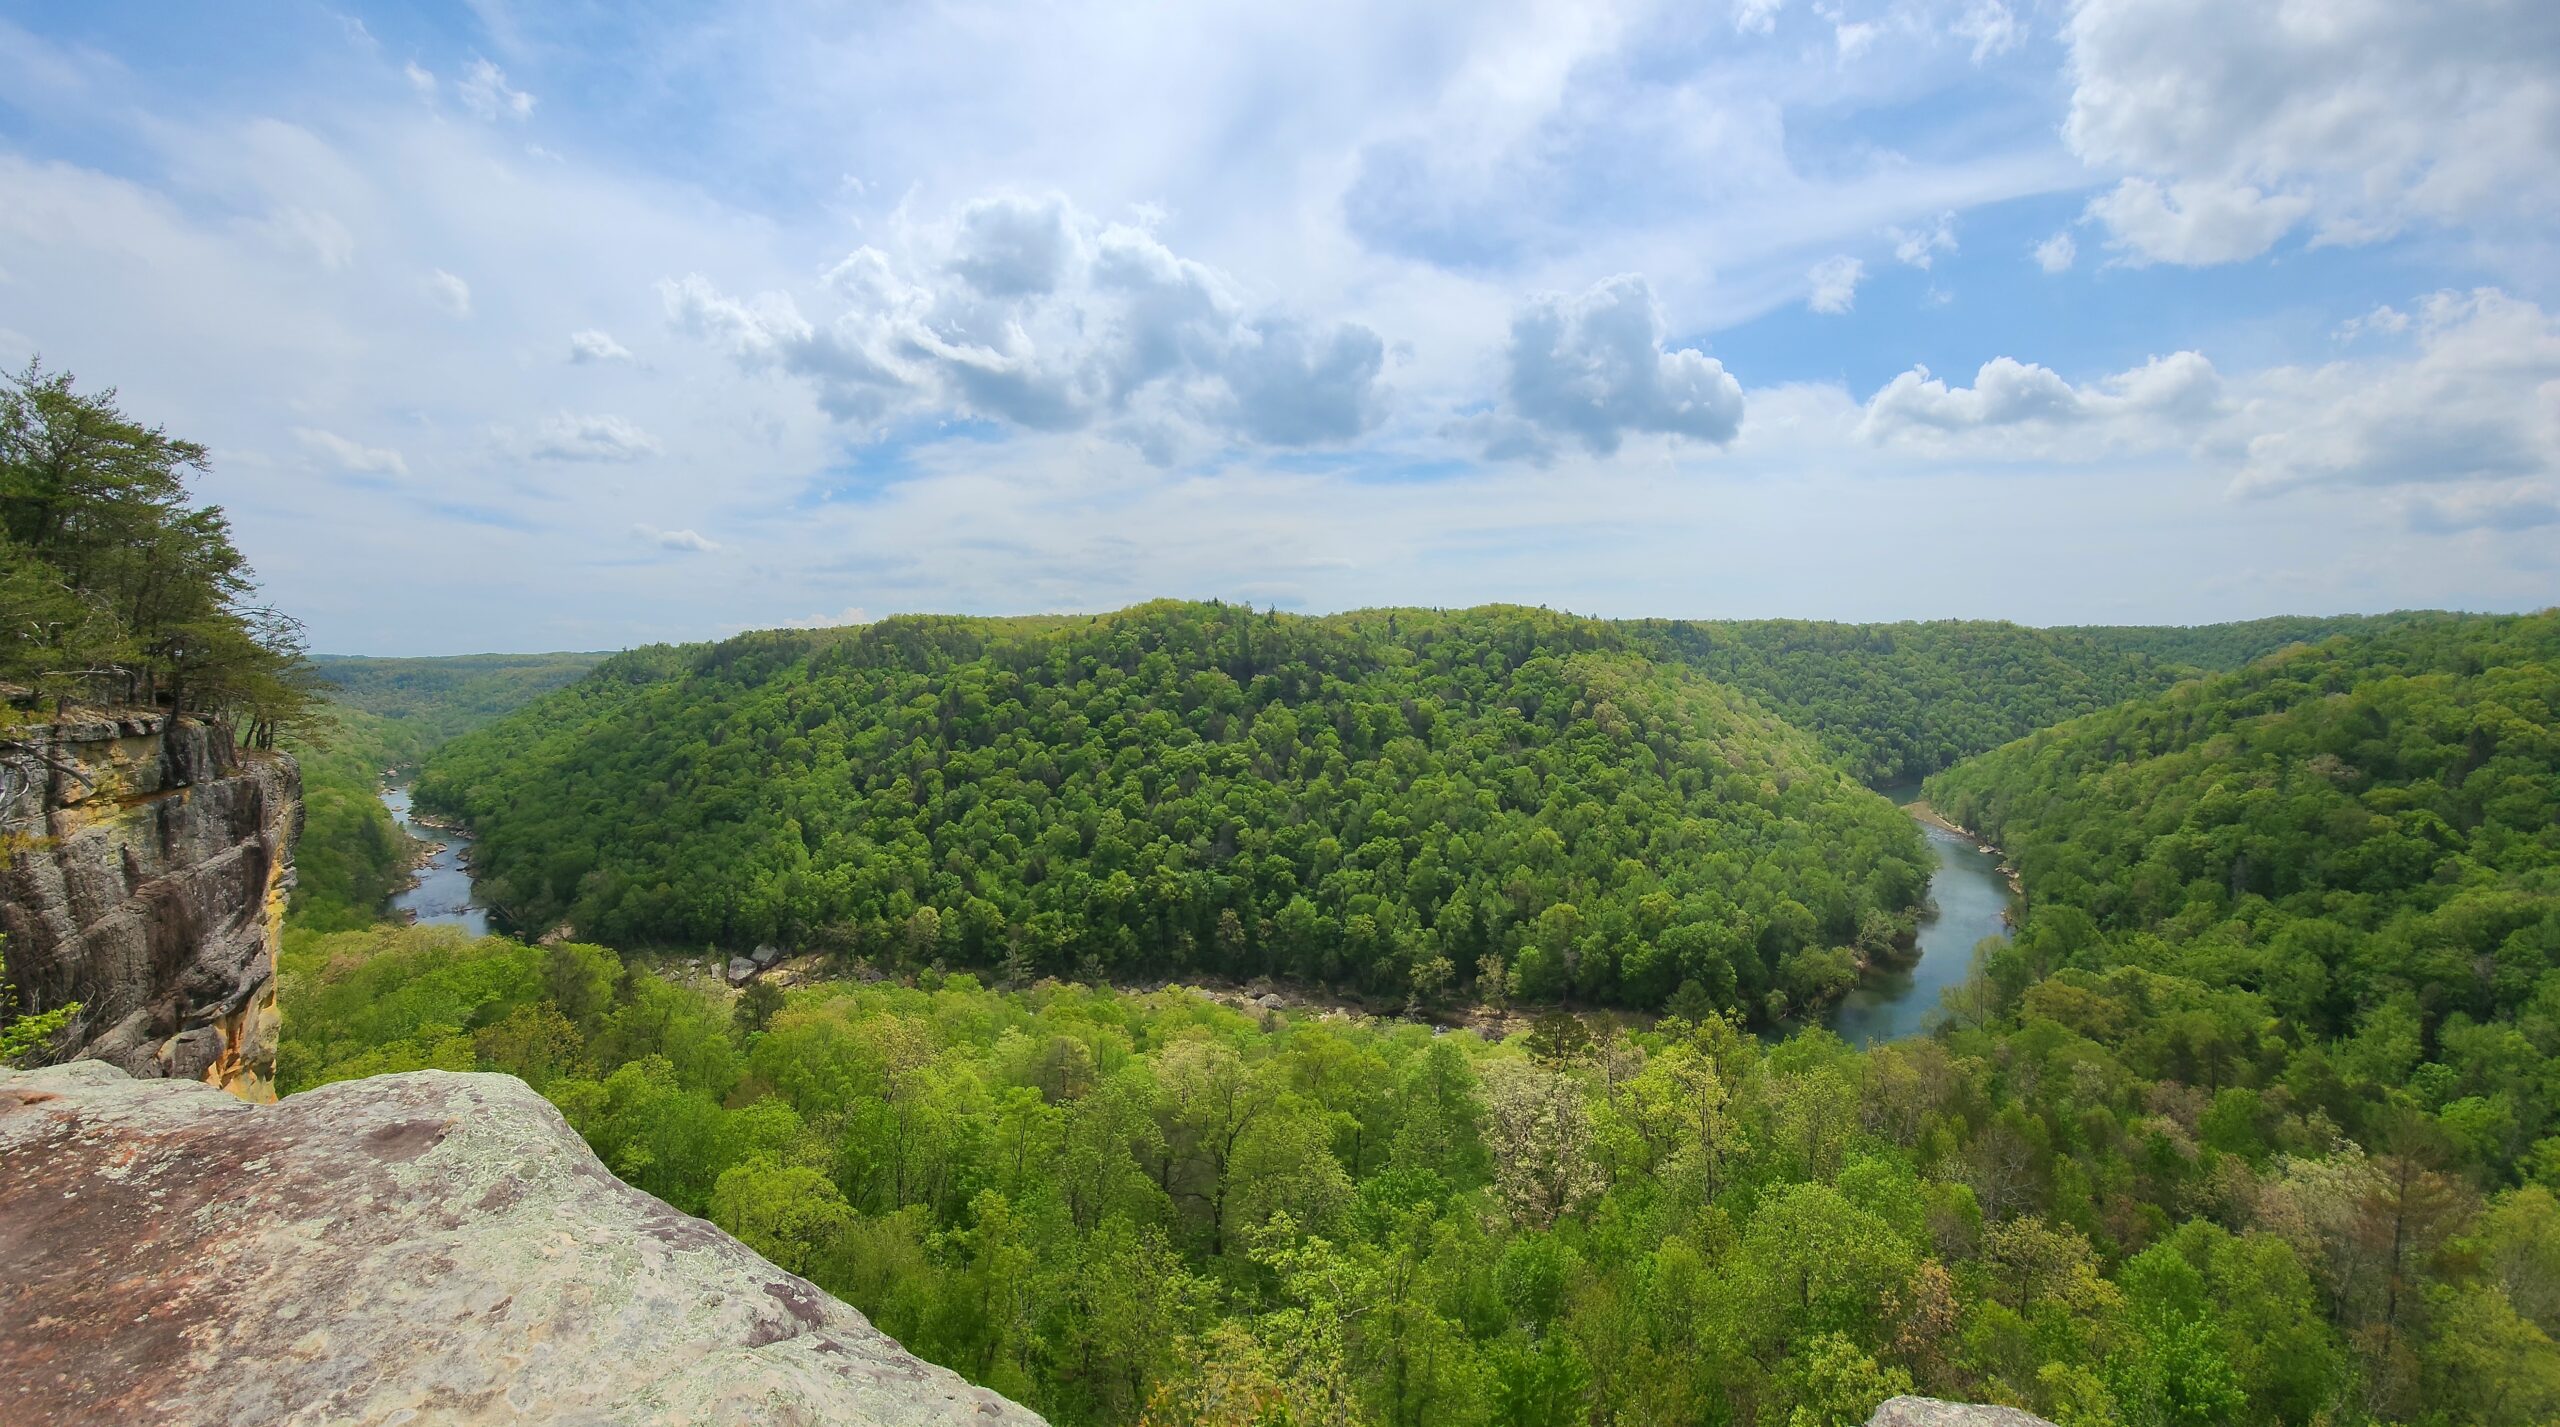 April 'Hike-a-Thon' Supporting Nature in Tennessee_Angel Falls Overlook at Big South Fork_Credit Melinda Watters.